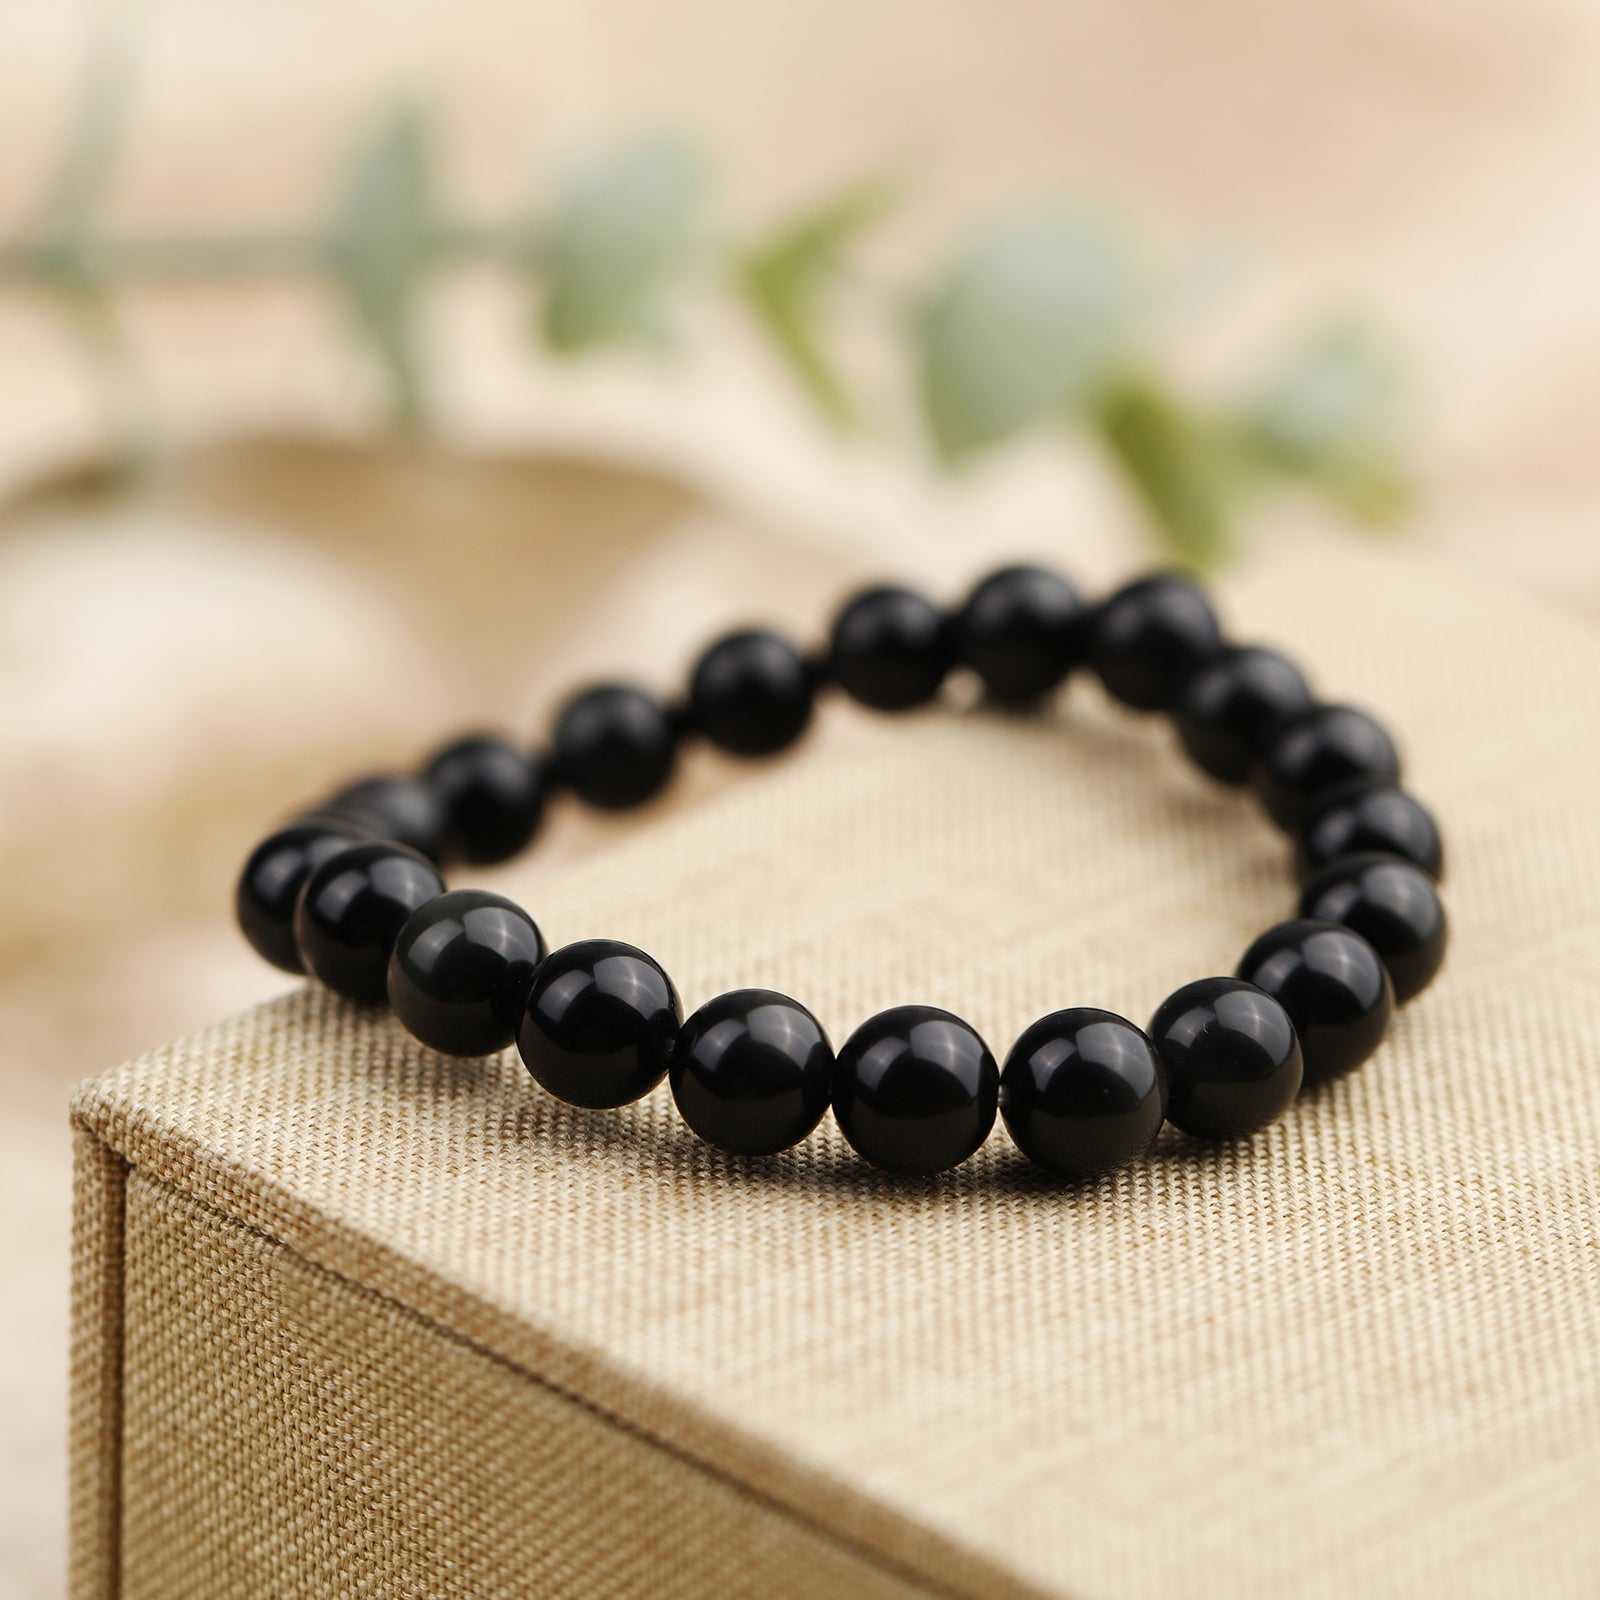 Black Obsidian: Meaning, Healing Properties And Uses